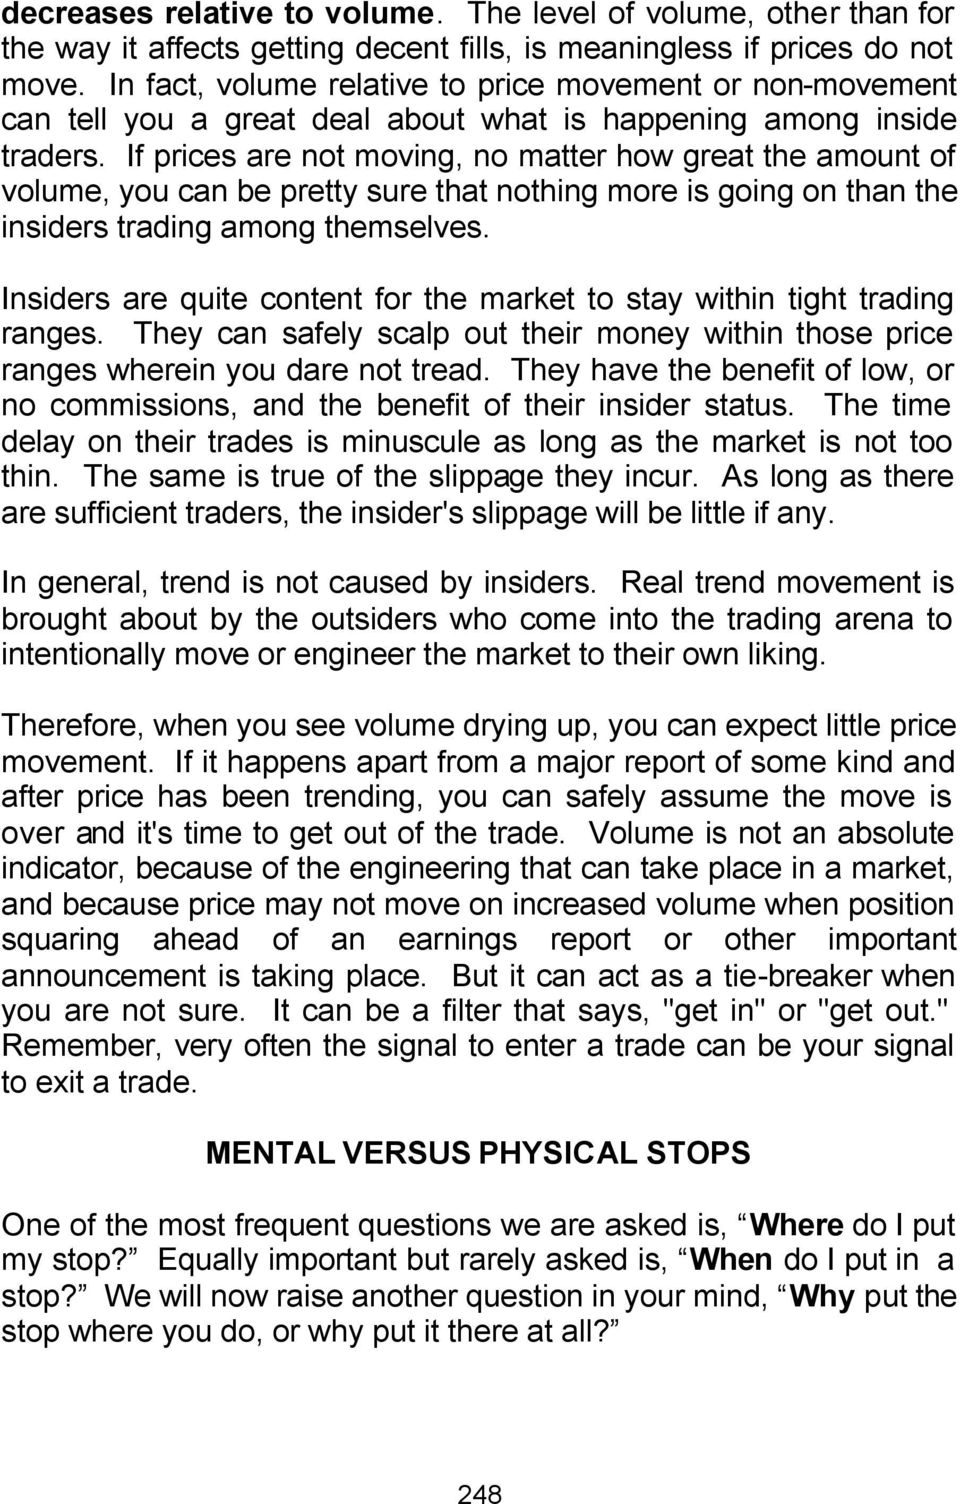 If prices are not moving, no matter how great the amount of volume, you can be pretty sure that nothing more is going on than the insiders trading among themselves.